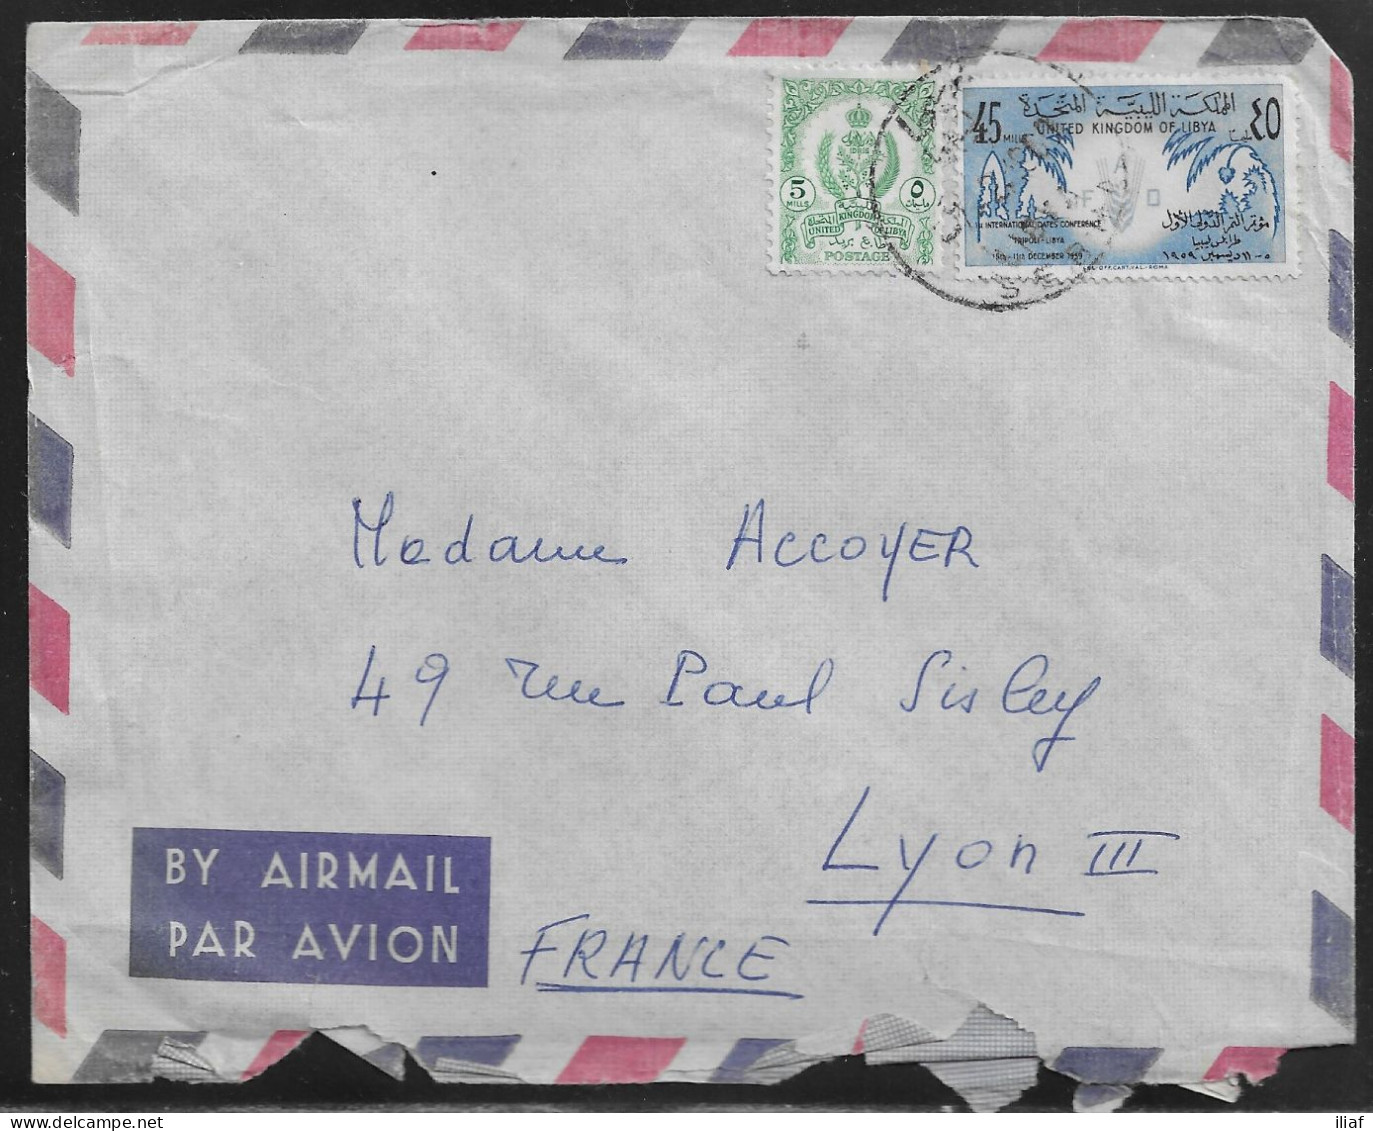 Libya. Stamps Sc. 156, 185 On Air Mail Letter, Sent From Sebha, Libya At 21.12.1960 To France. - Libia